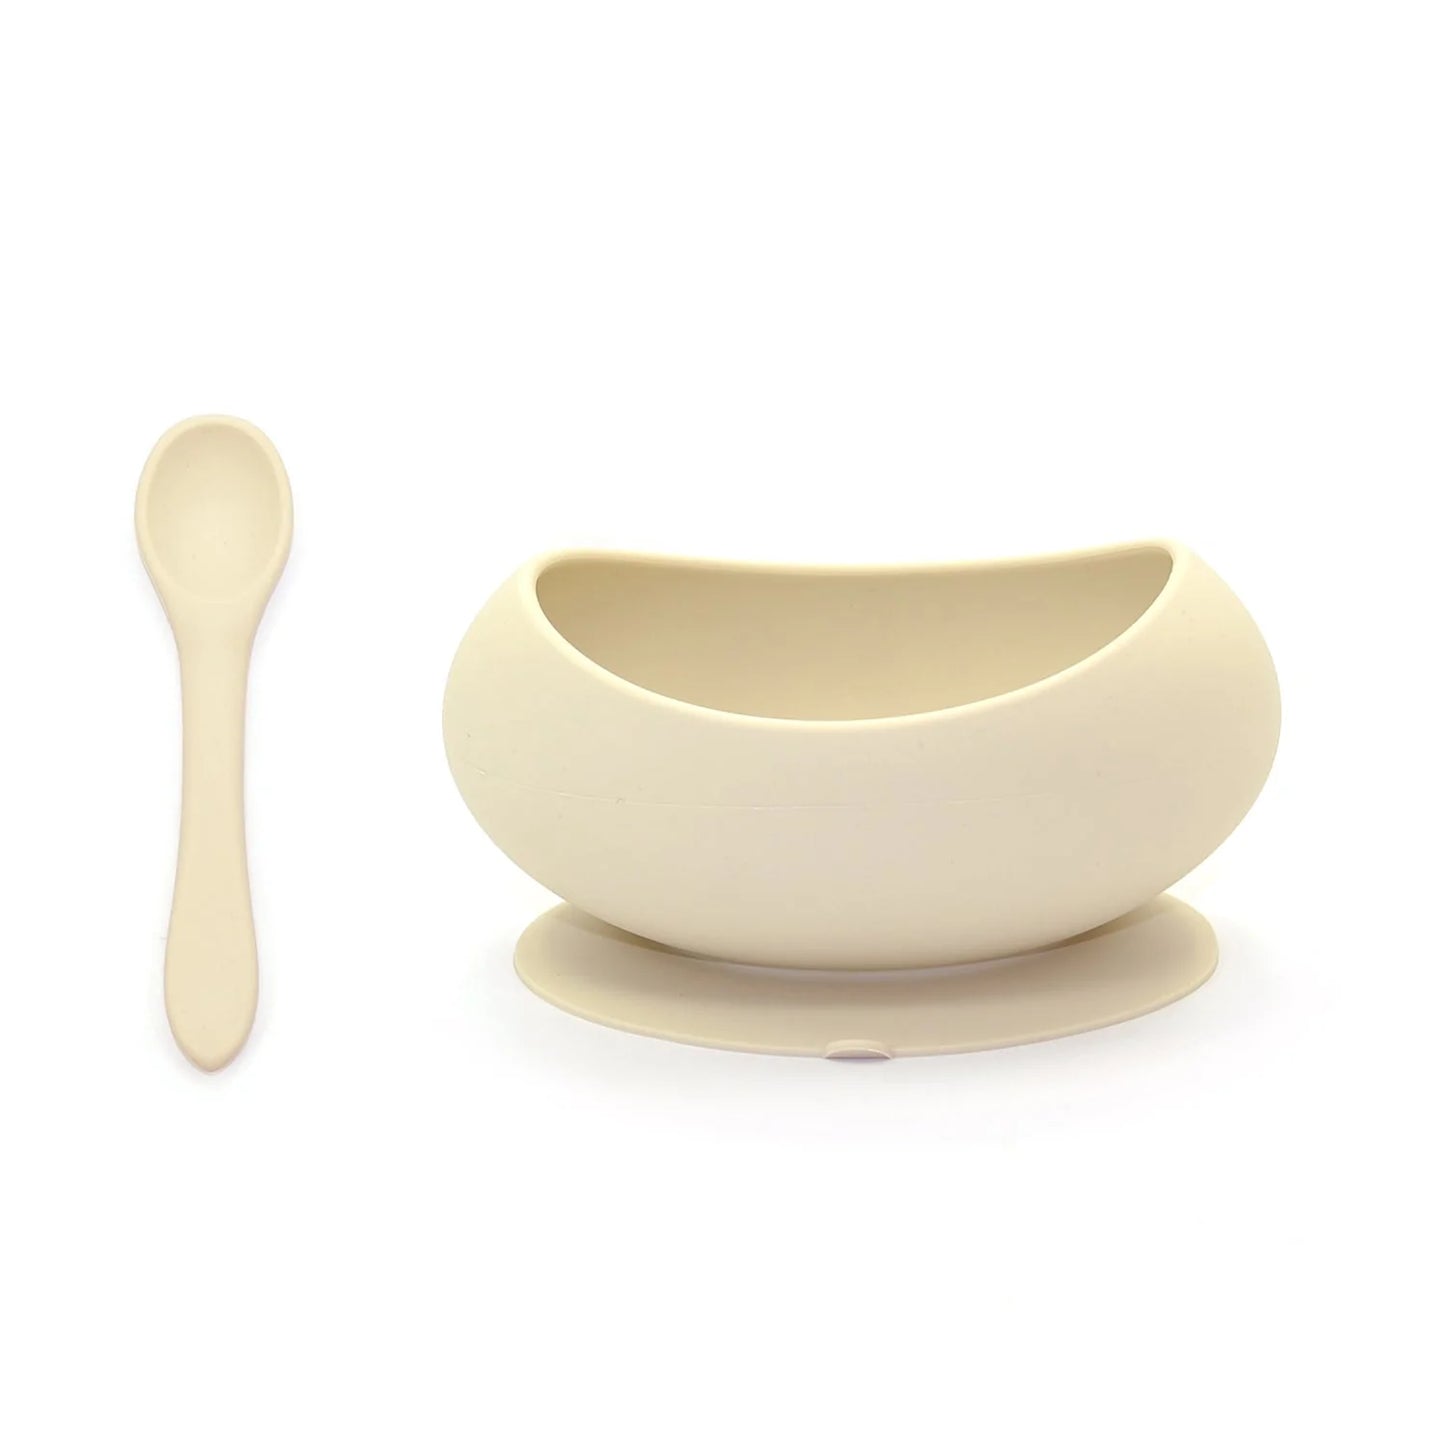 OB Designs Stage 1 Suction Bowl & Spoon Set